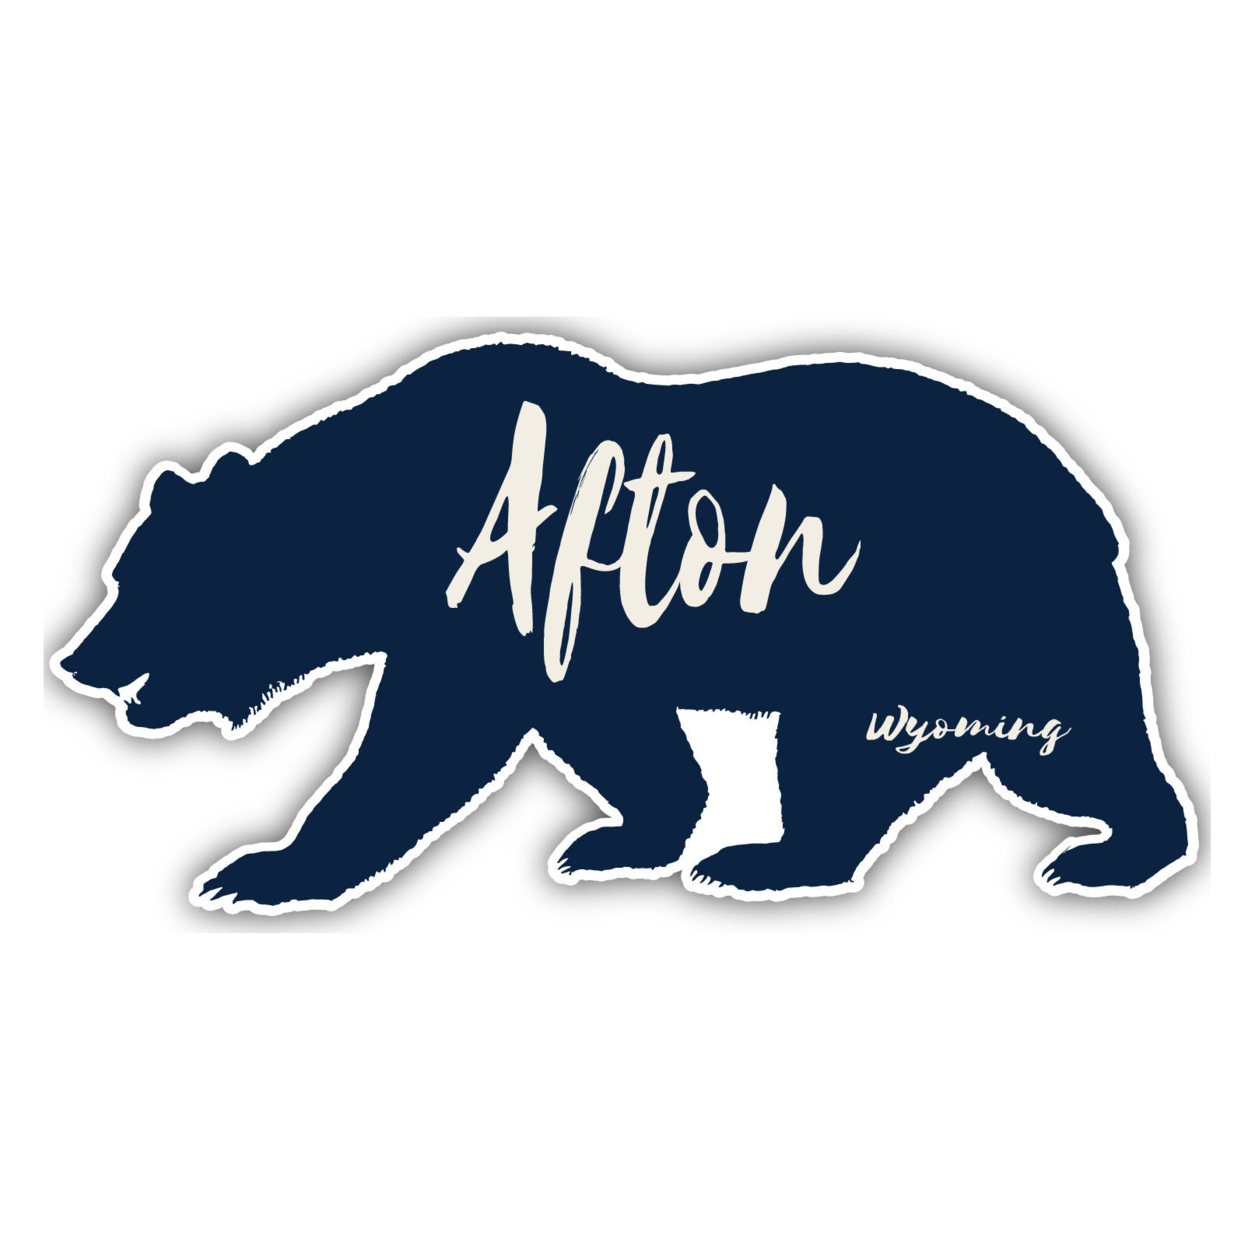 Afton Wyoming Souvenir Decorative Stickers (Choose Theme And Size) - Single Unit, 10-Inch, Bear